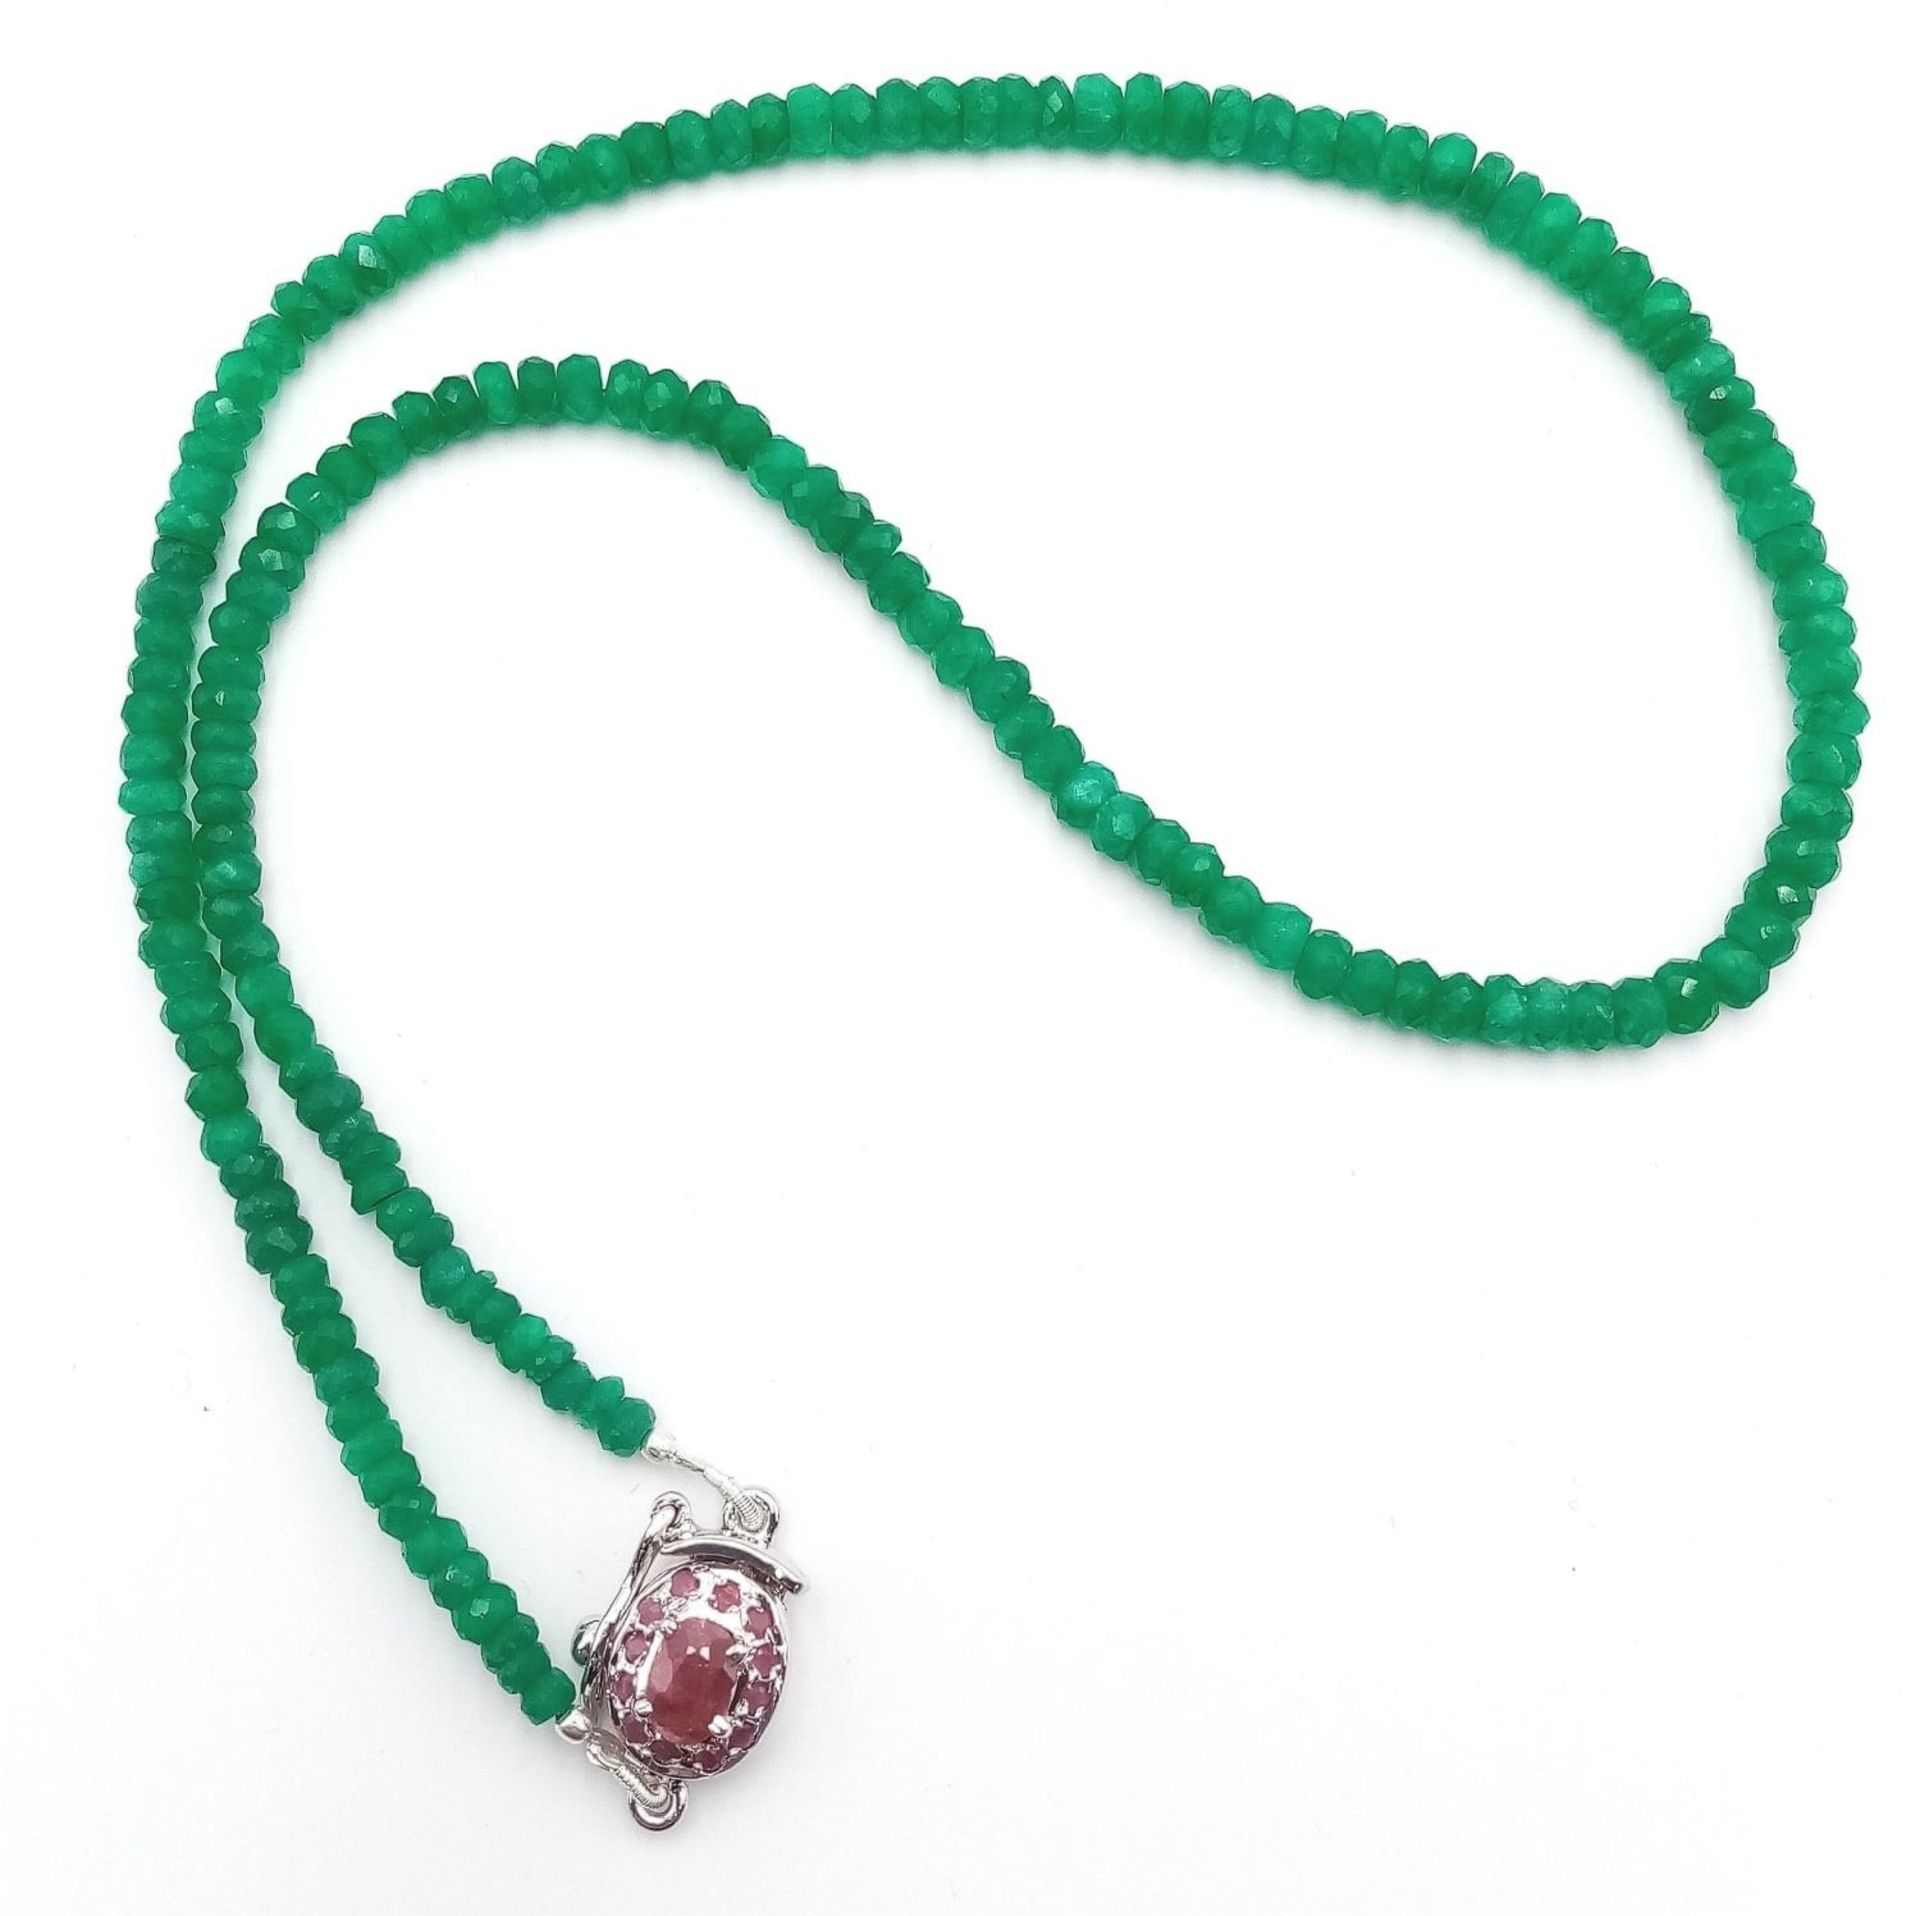 A 95ct Single Strand Emerald Rondelle Necklace with a Ruby and 925 Silver Clasp. 44cm. Ref: Cd-1285 - Image 3 of 5